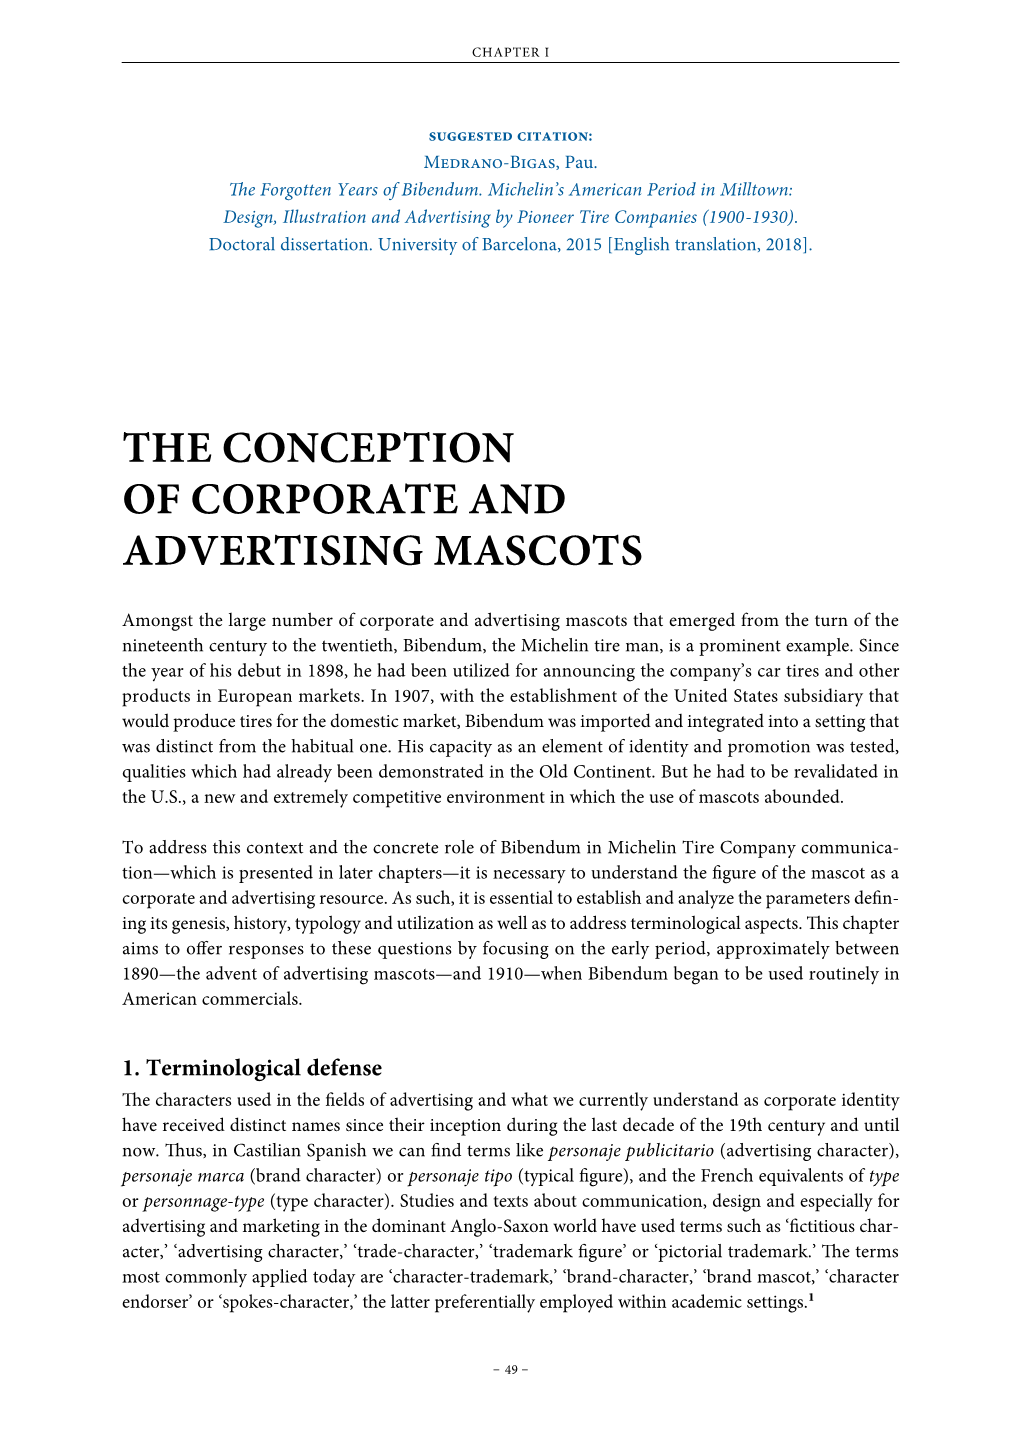 The Conception of Corporate and Advertising Mascots